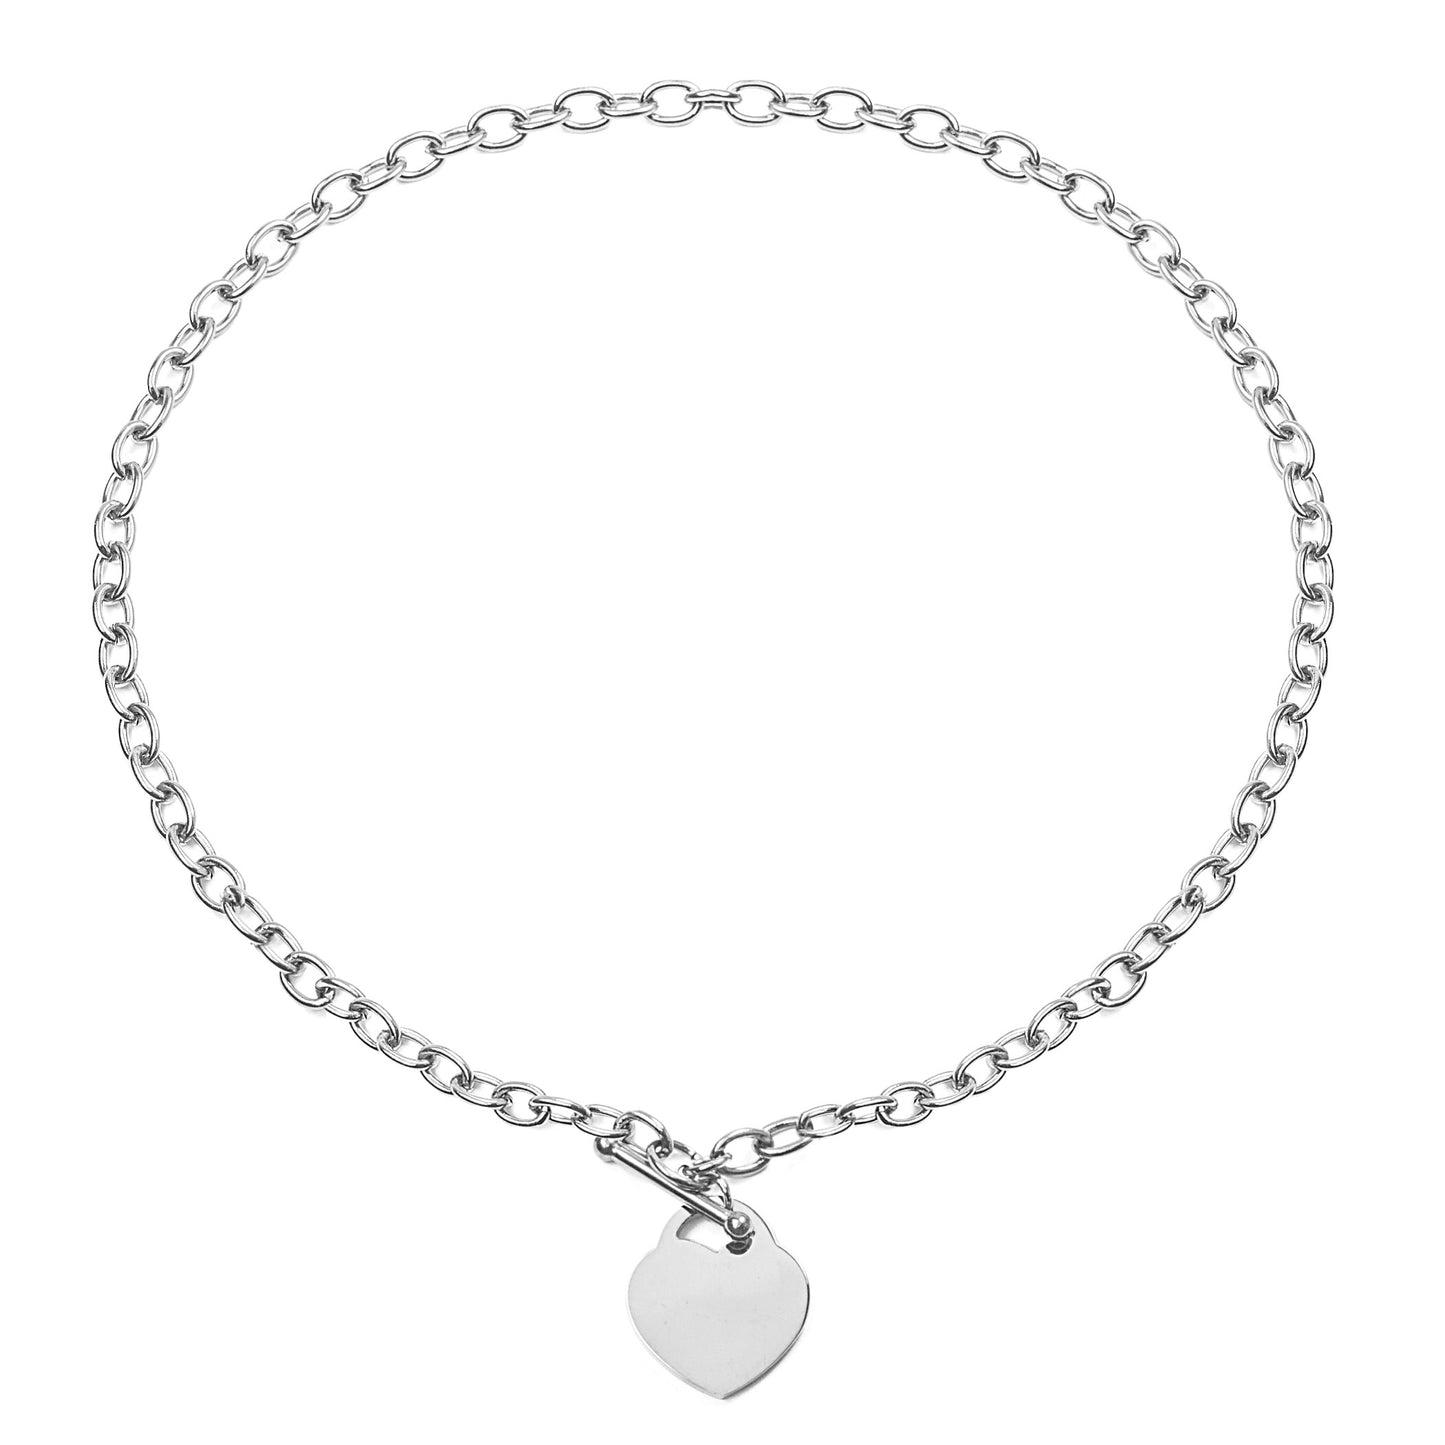 ELYA Women's Polished Heart Charm Toggle Clasp Stainless Steel Necklace